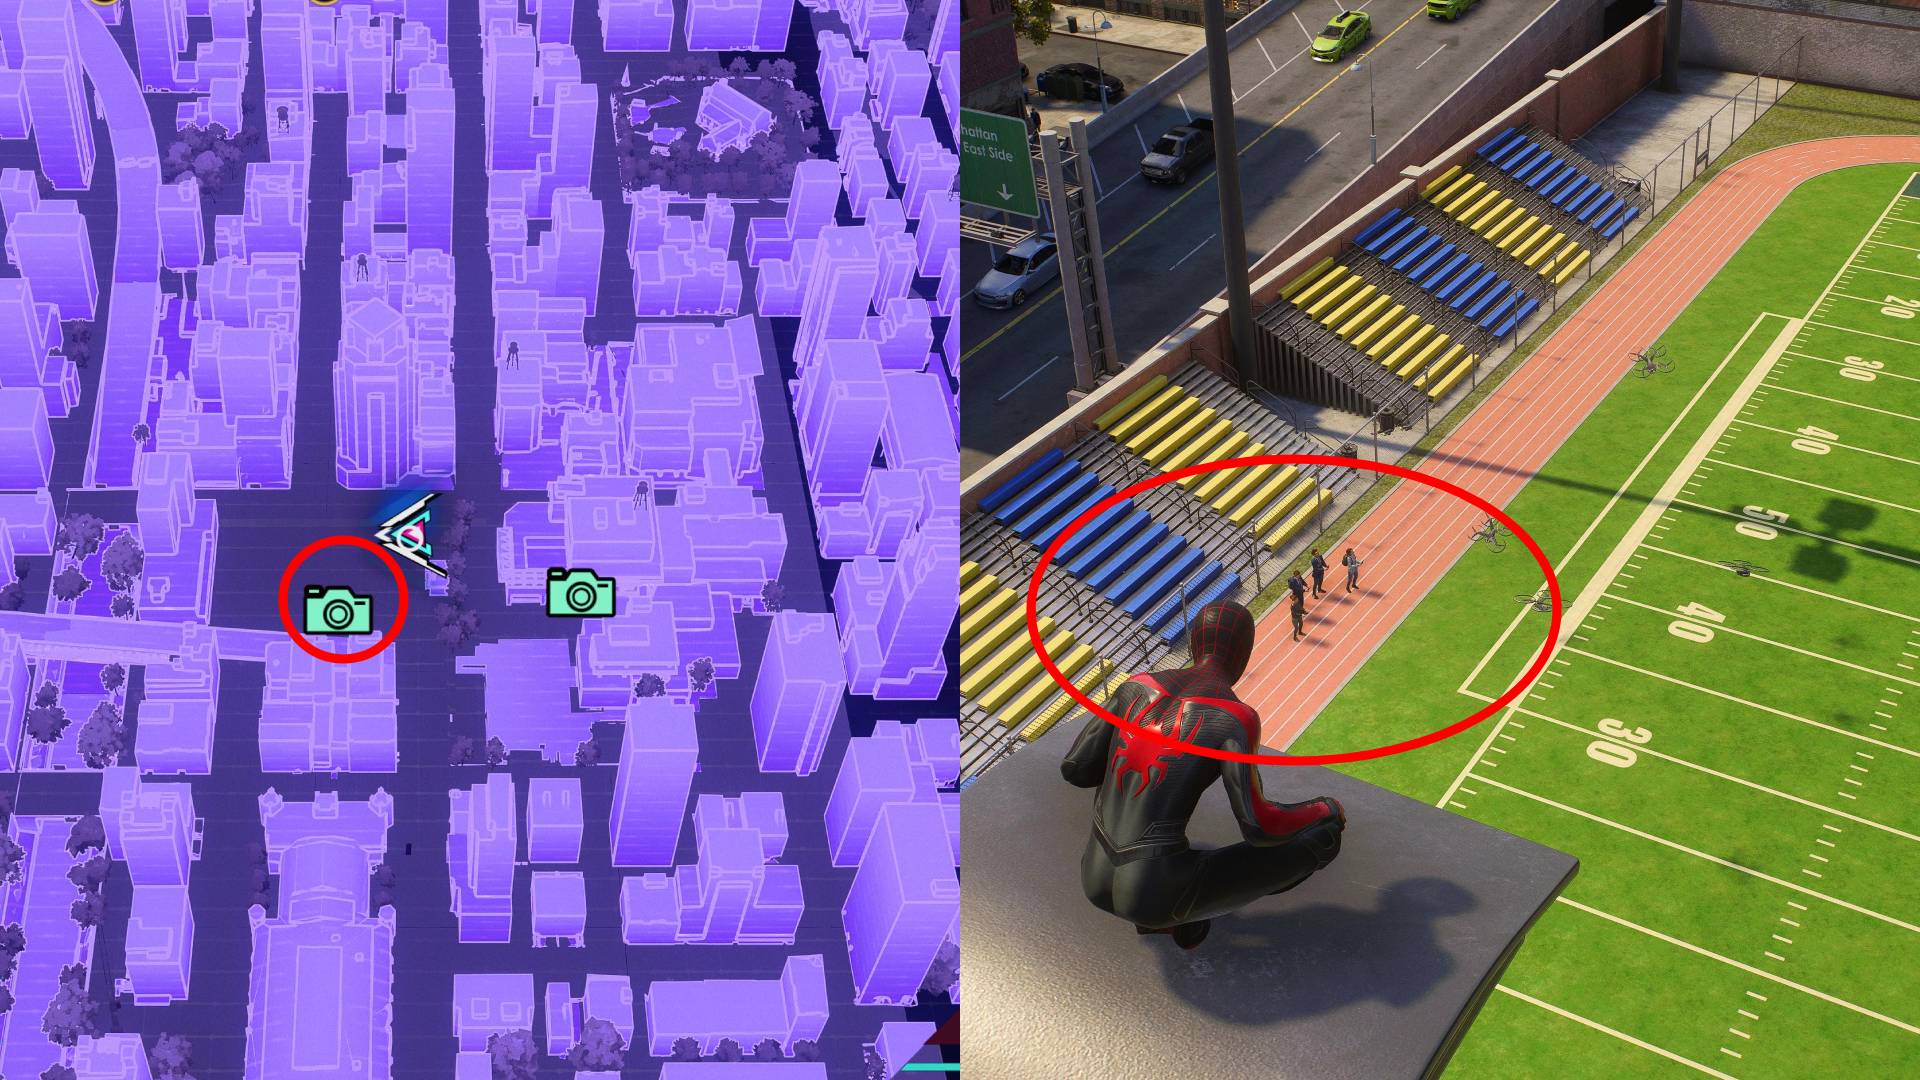 The location of the Drone Club in Marvel's Spider-Man 2